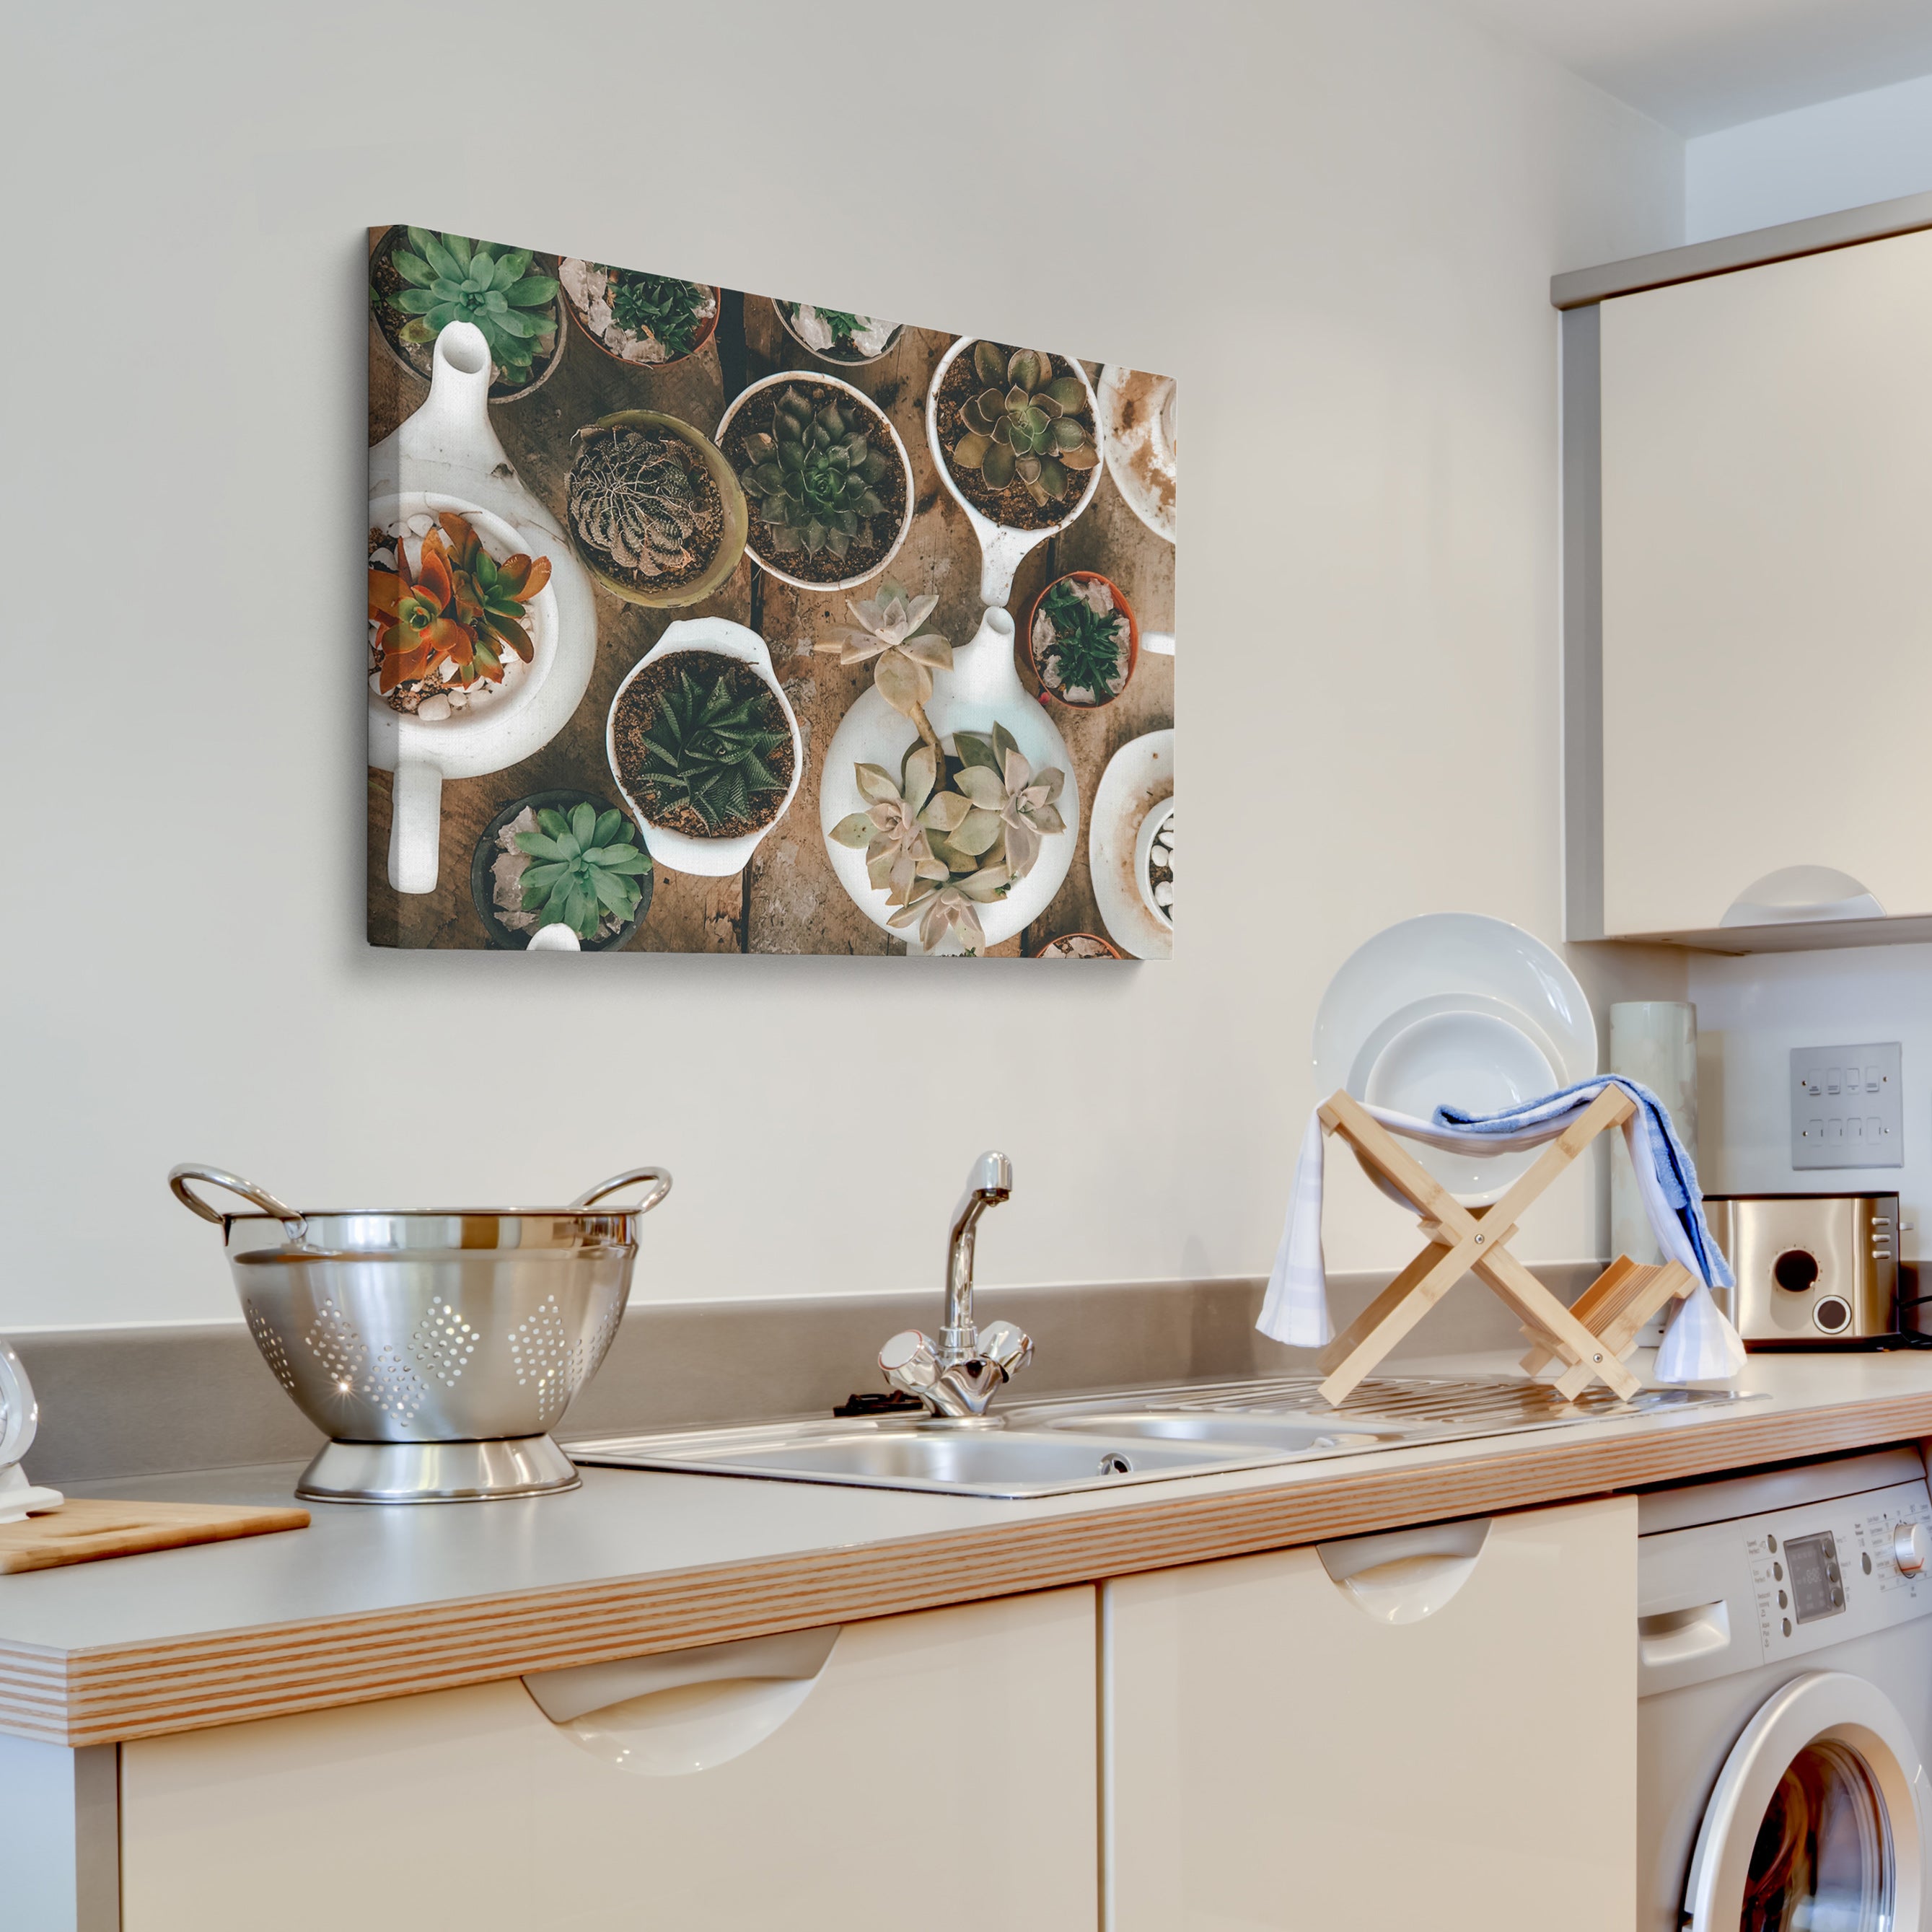 Canvas Print of Food Photo Displayed in Kitchen